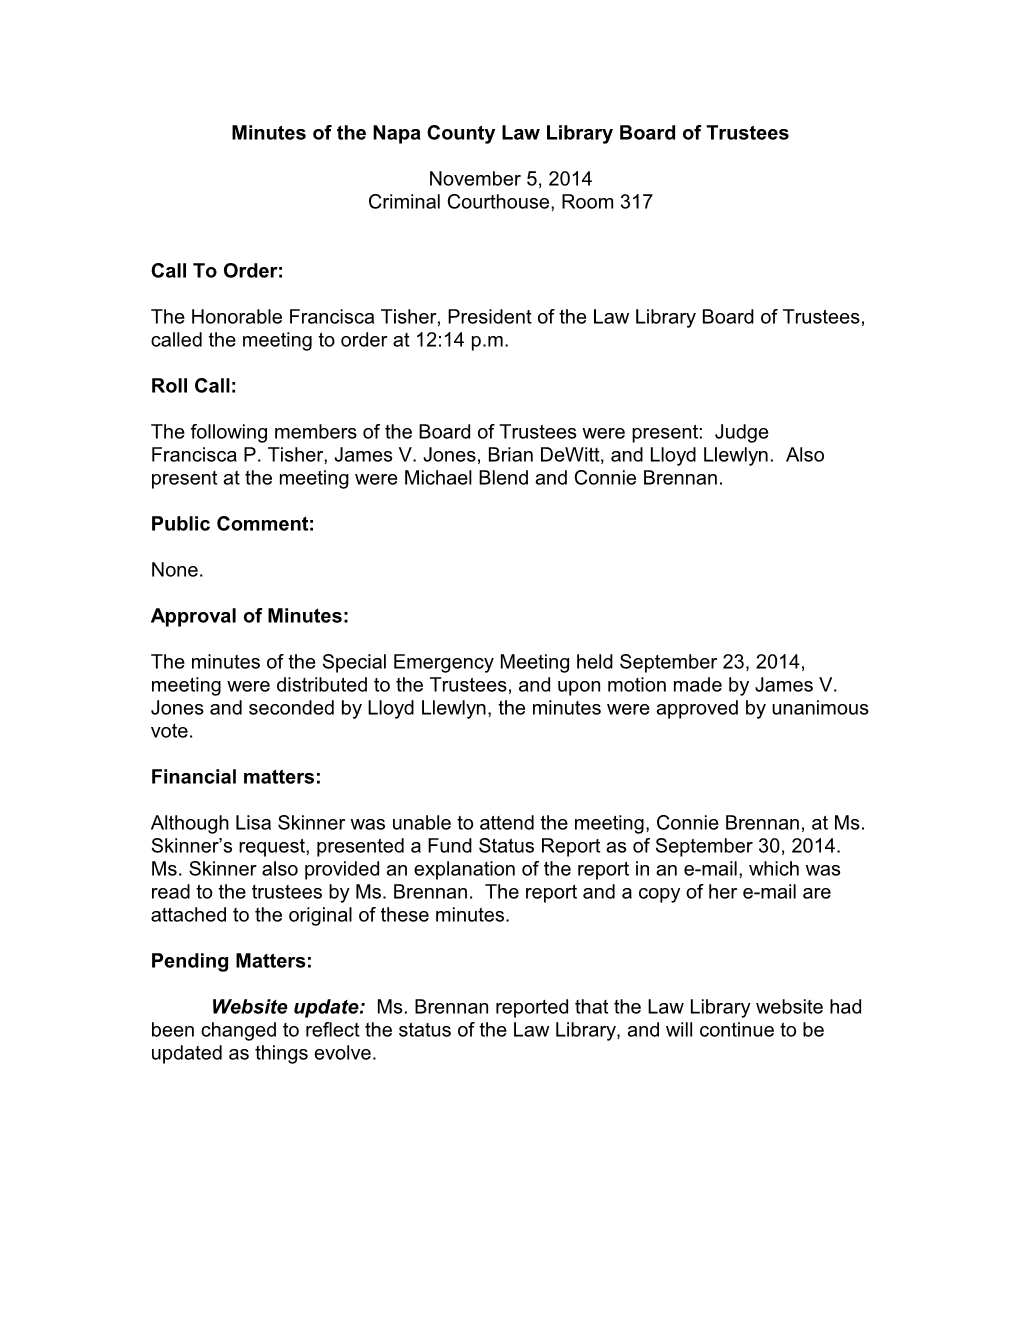 Minutes of the Napa County Law Library Board of Trustees